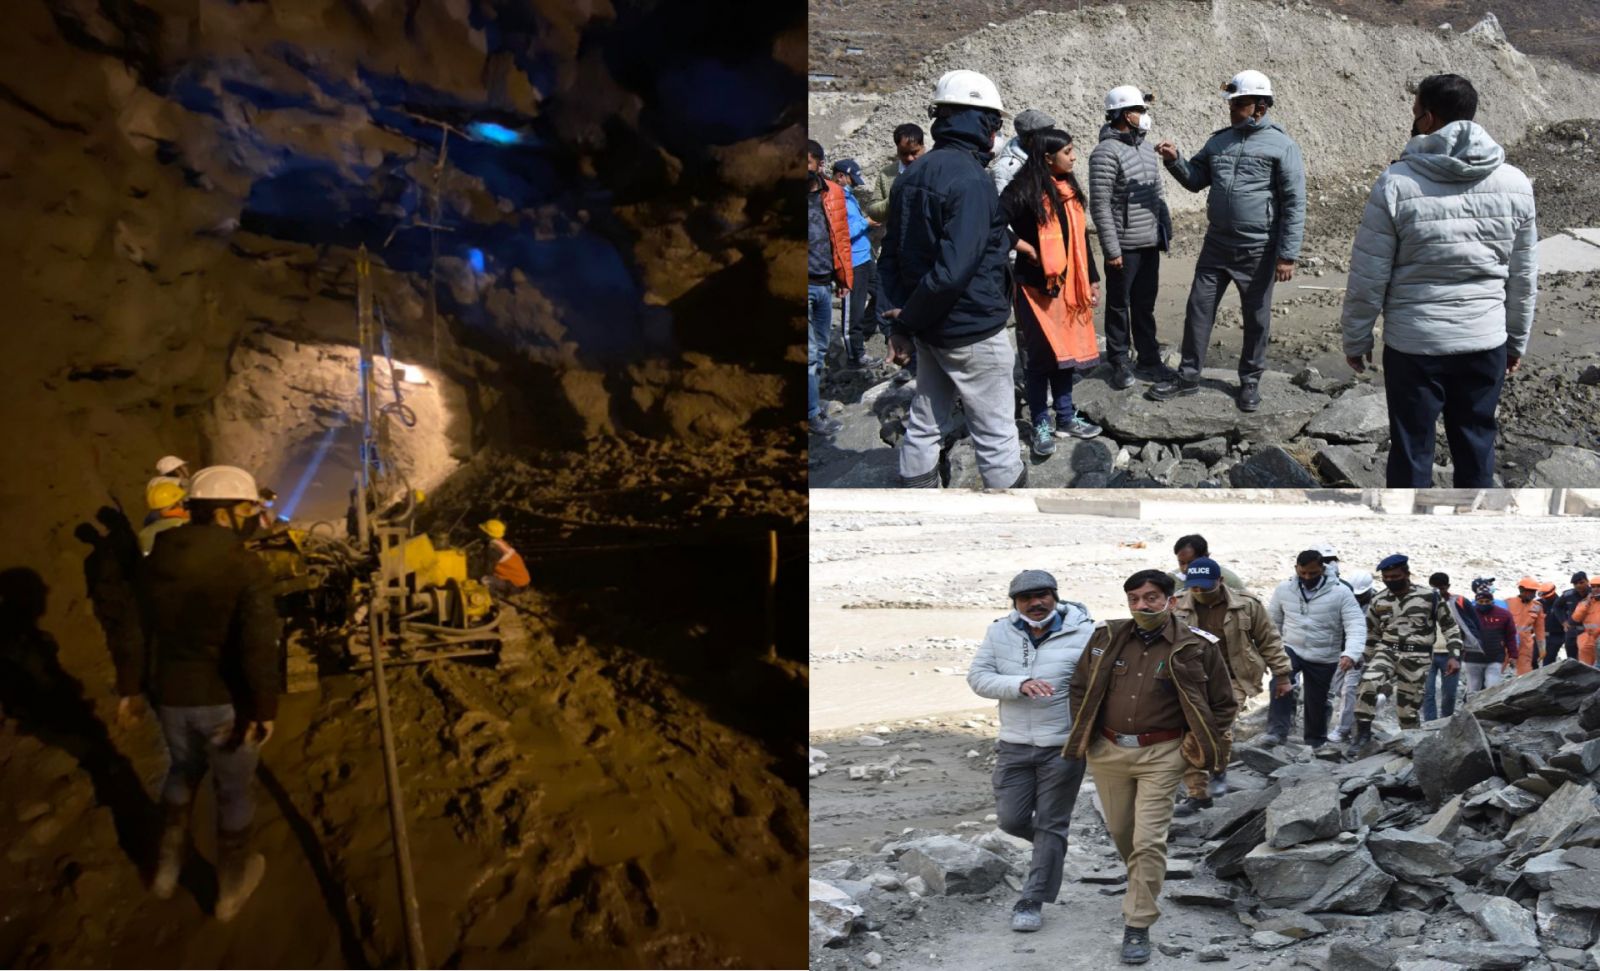 NTPC works on modalities for release of compensation; Rescue operation continues in full swing